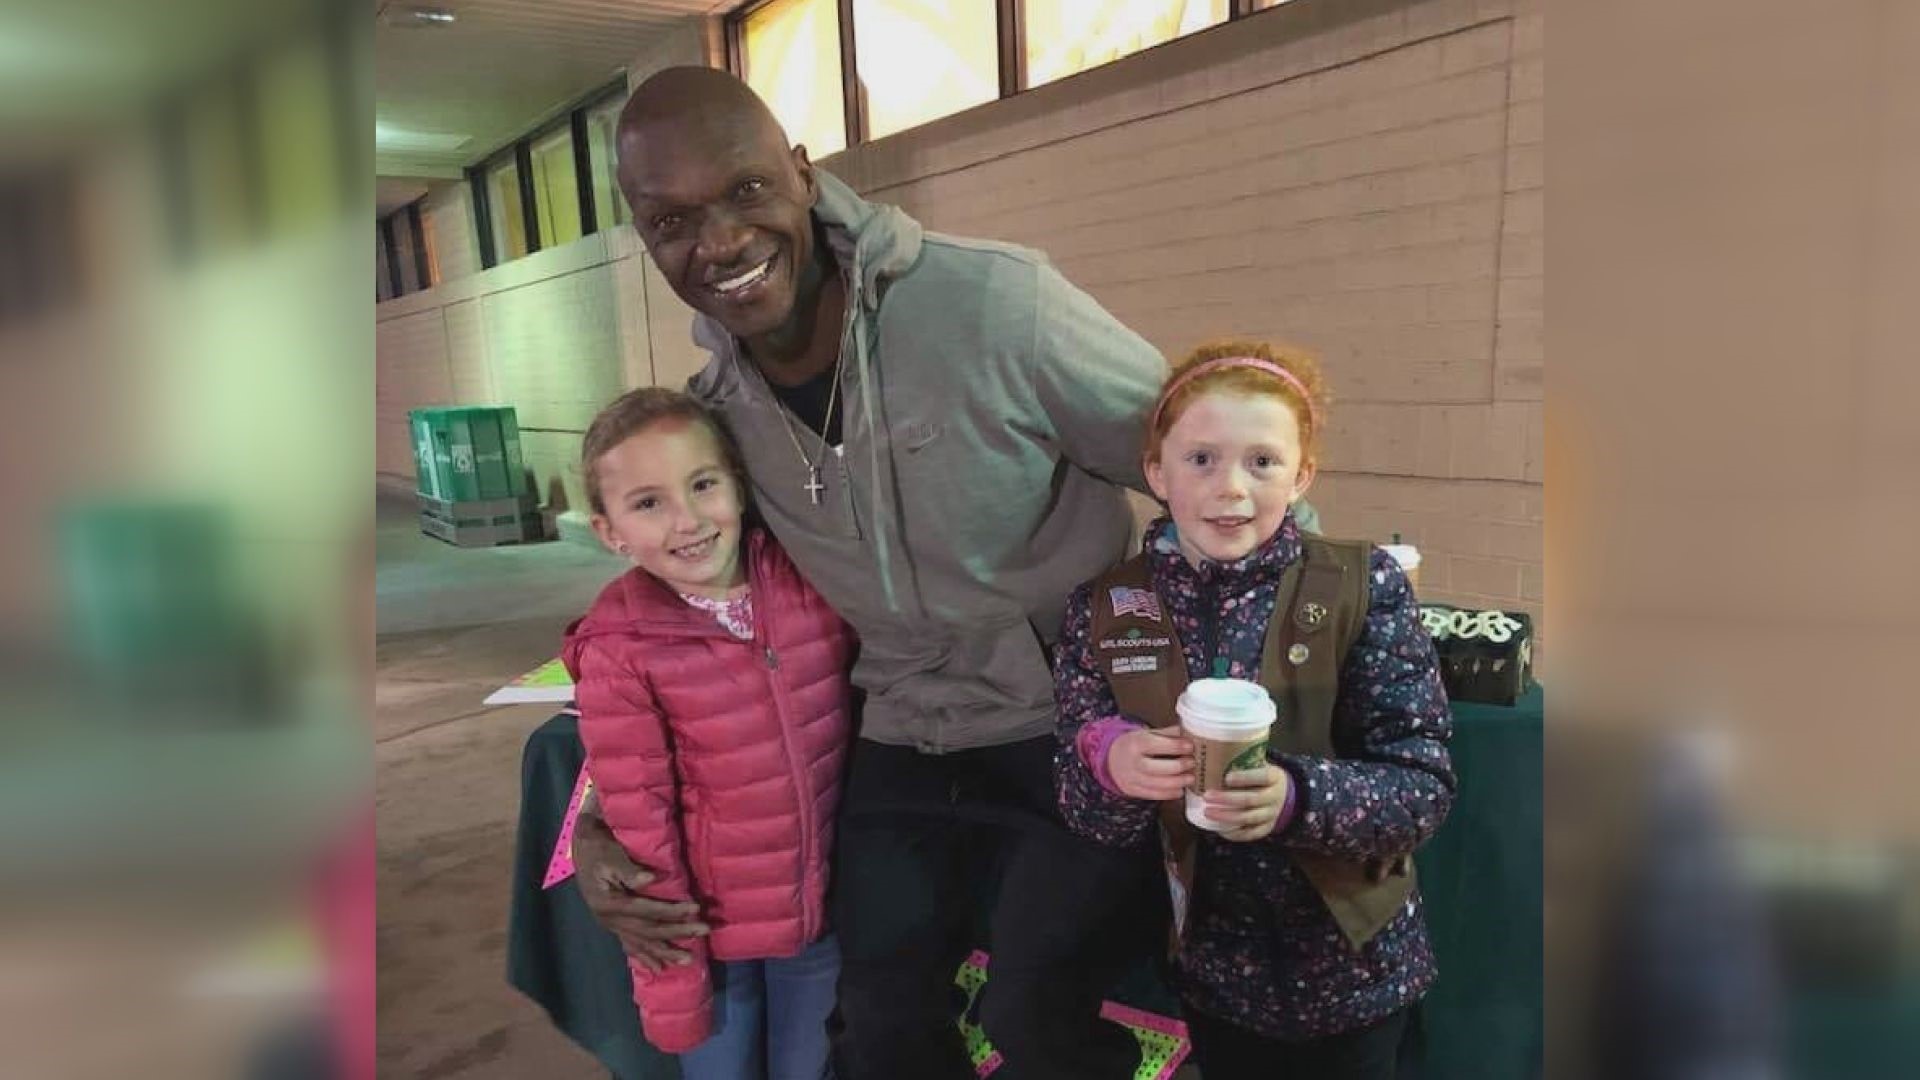 A South Carolina man spent $540 dollars on Girl Scout cookies to speed up two girls getting out of the cold.